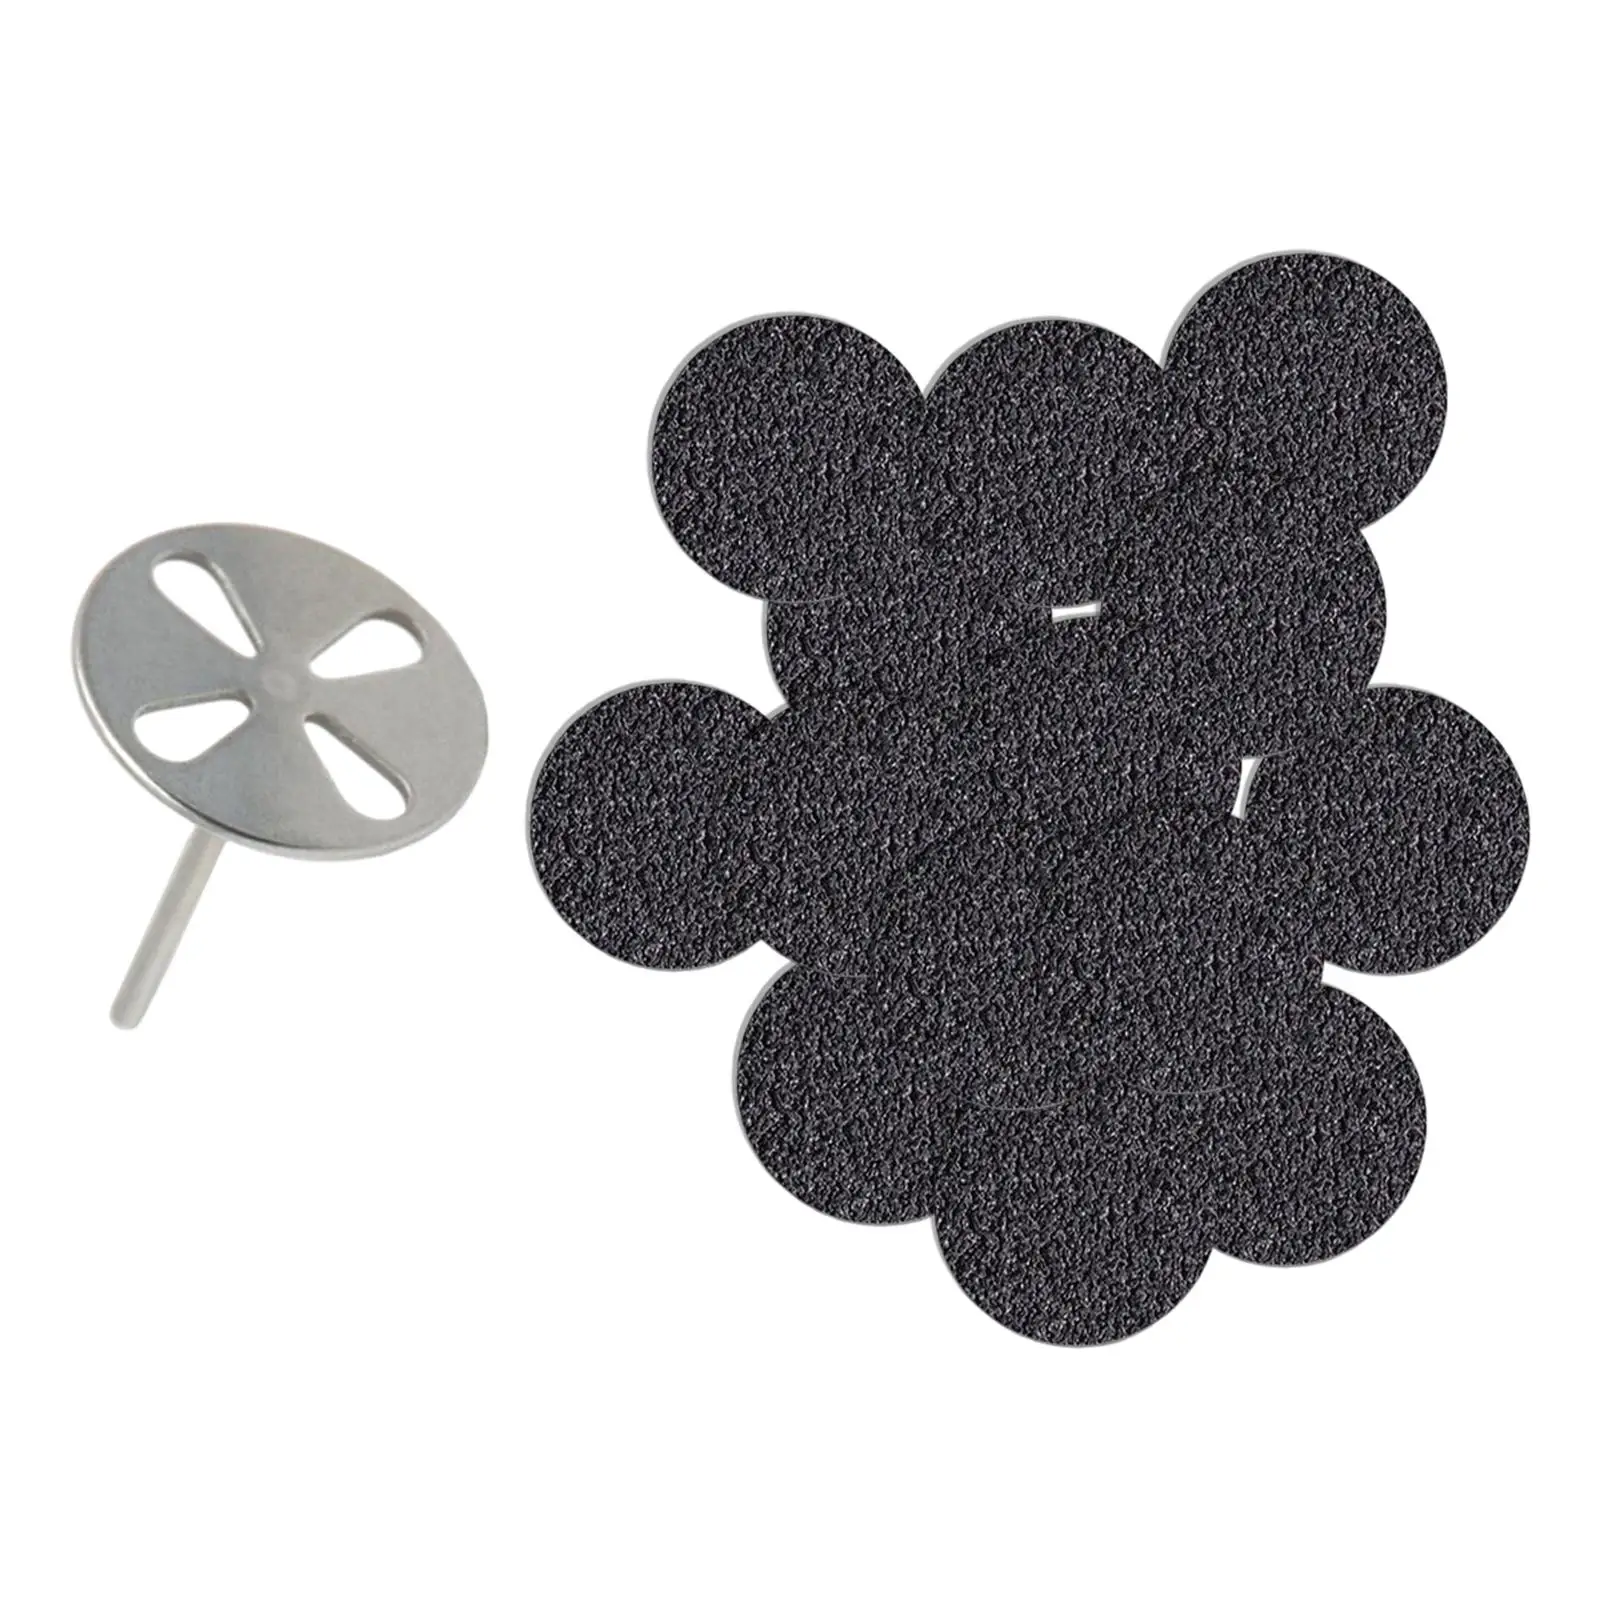 100 Pieces 25mm Sand Papers Sanding Disc Bit Sandpaper Replacement for Electric Foot File Hard Skin Dead Skin Foot Tool